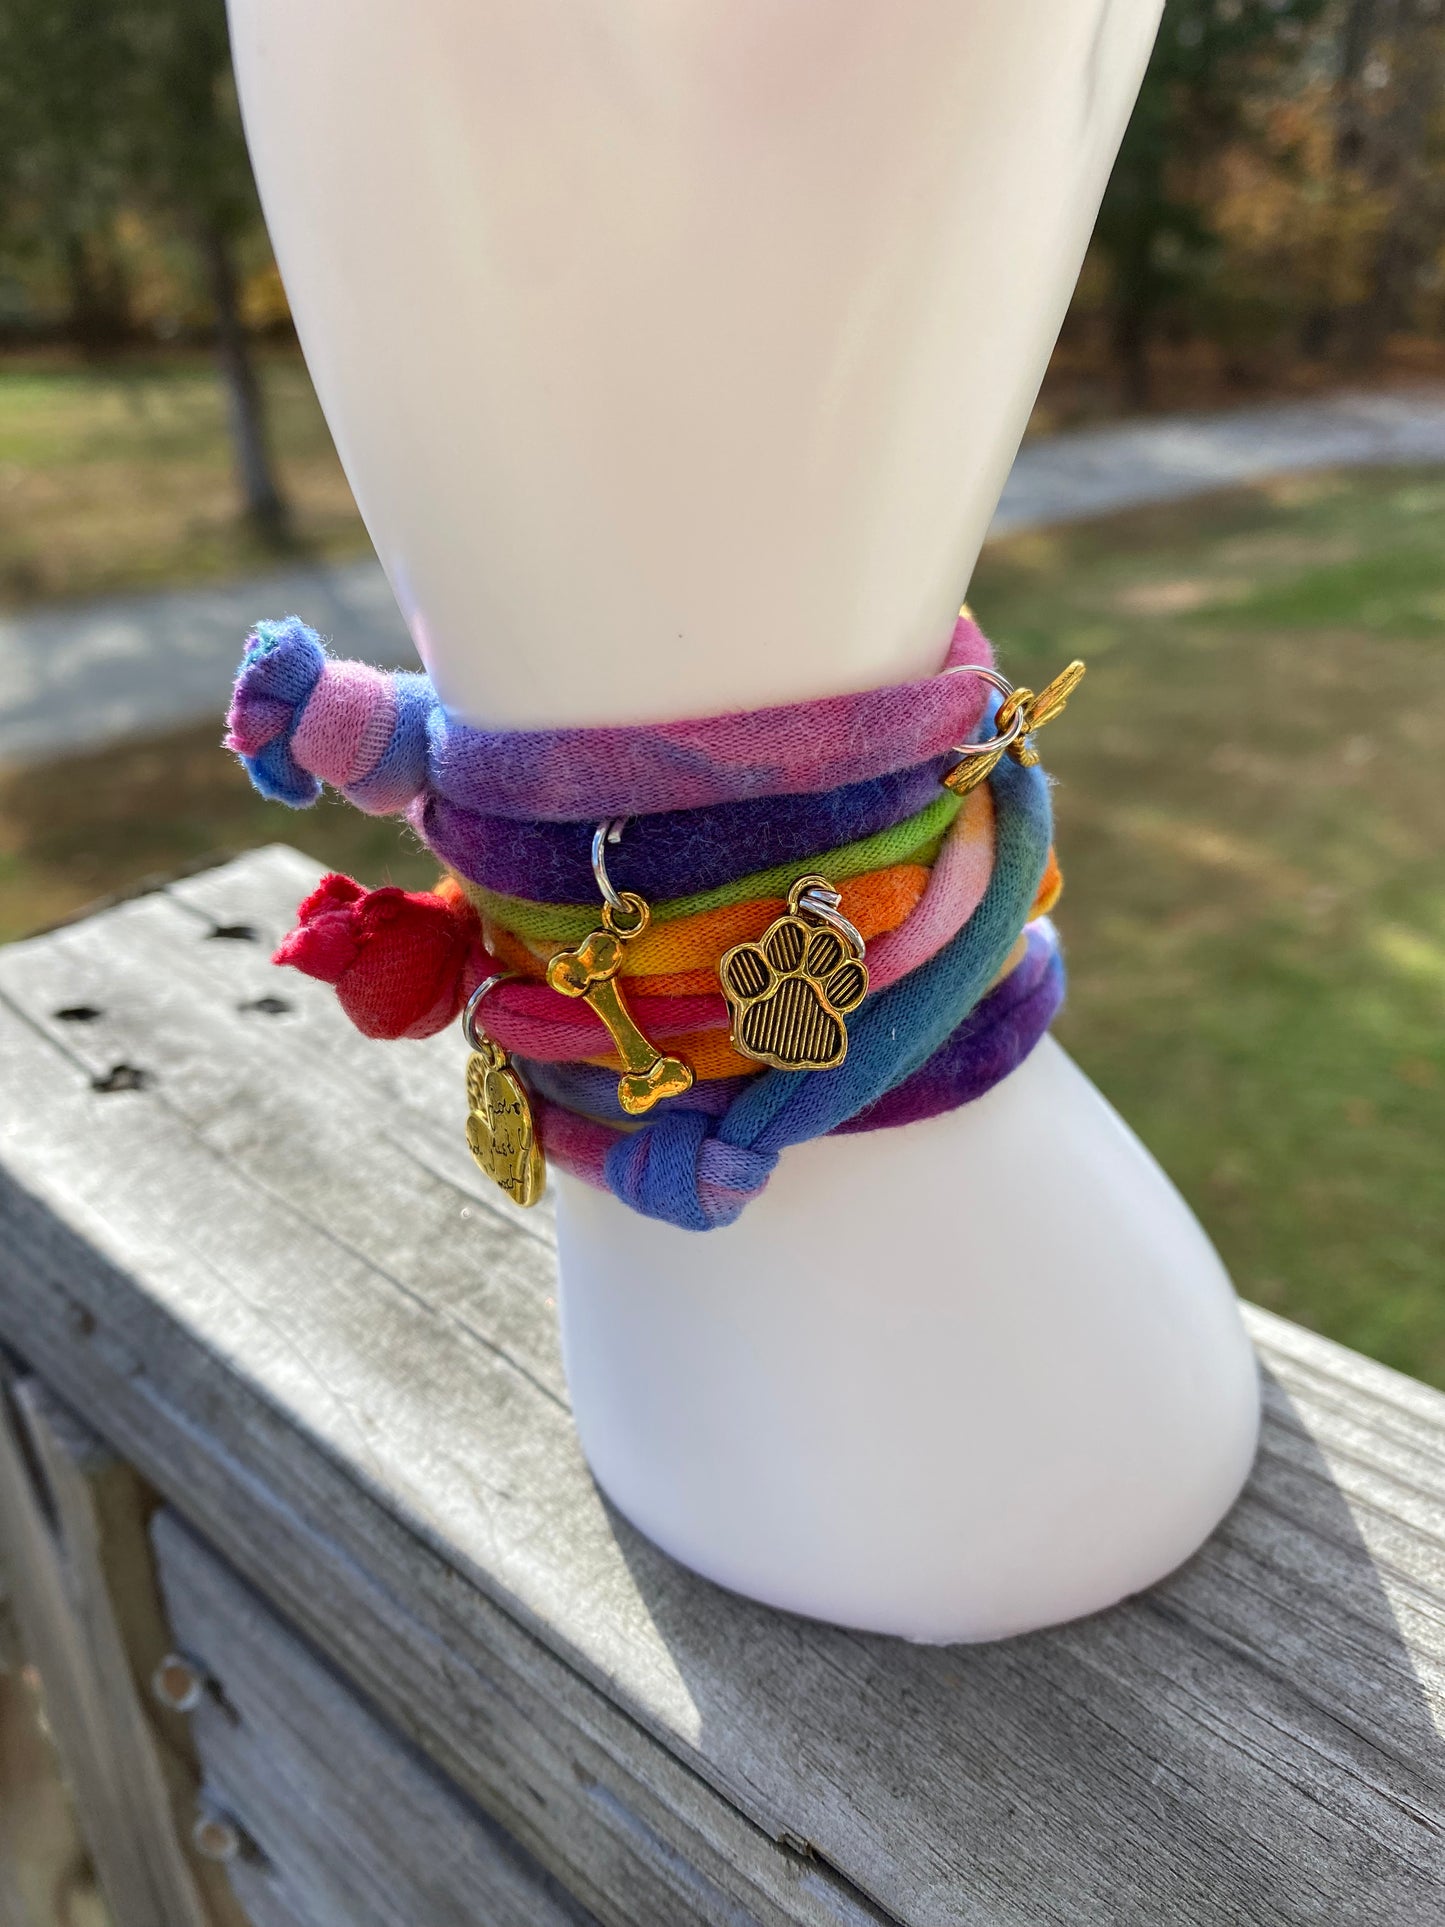 Woof! Natural Wraps - Charm Bracelet, anklet and more! Beautiful and unique! You choose!